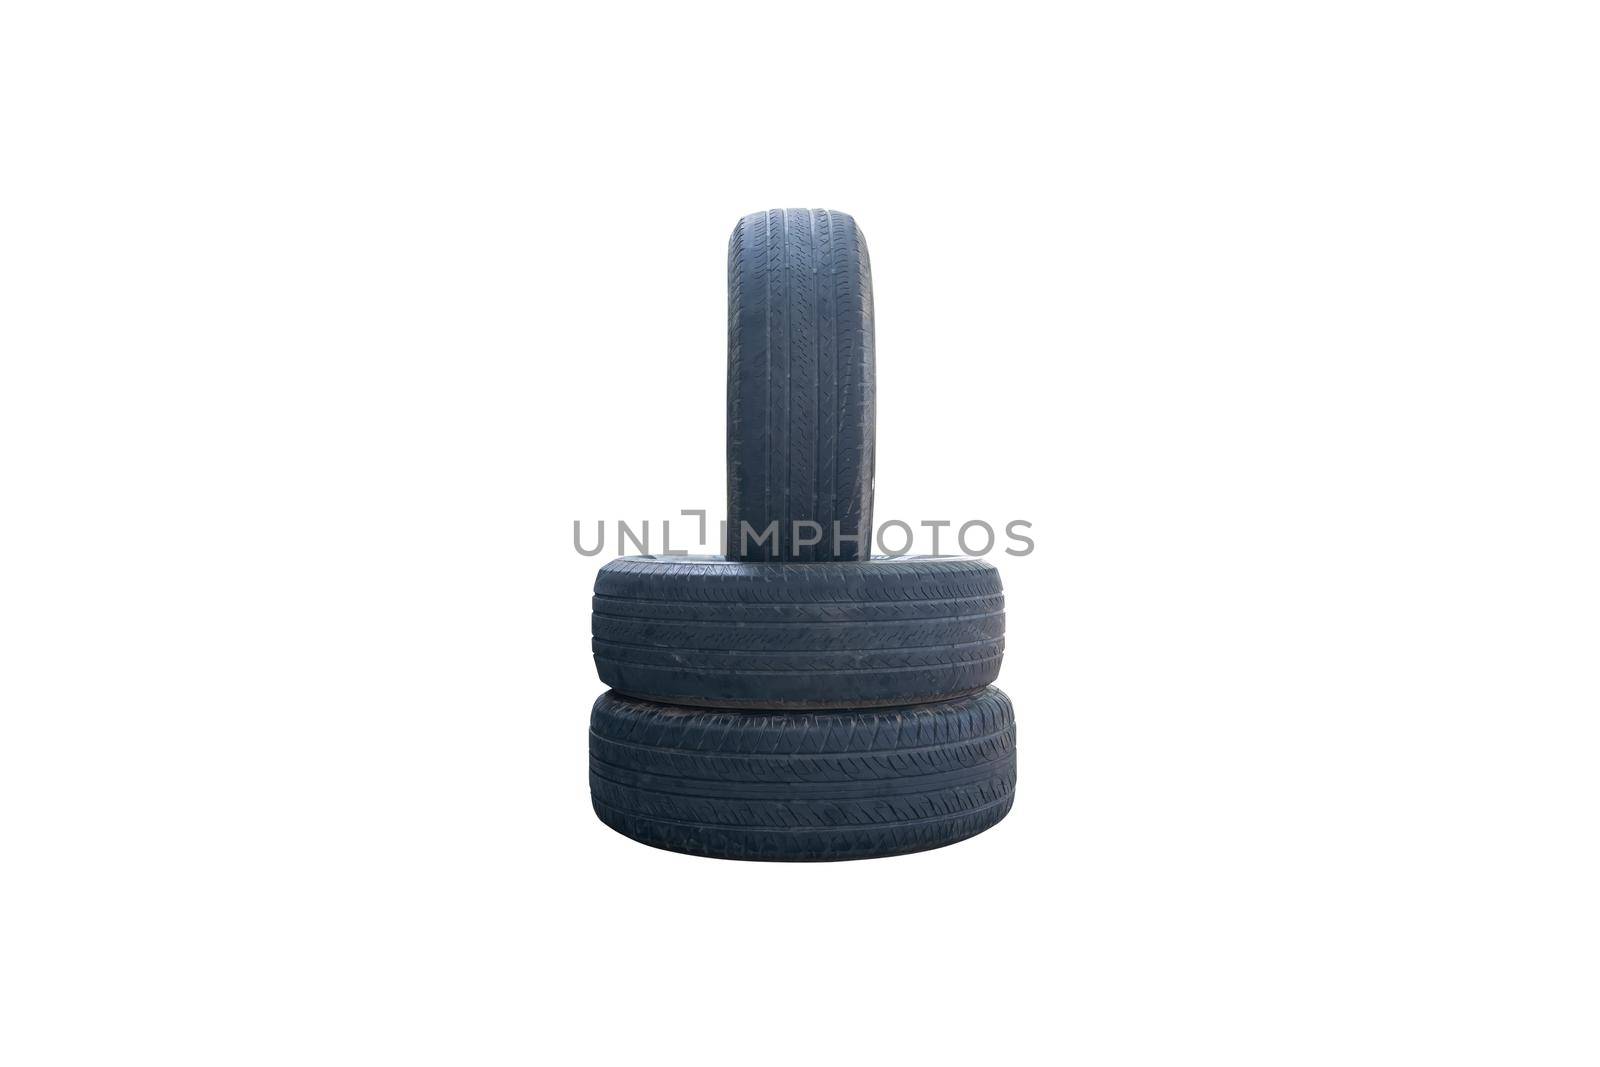 Pile of old car tires isolated on white background, with clipping path.